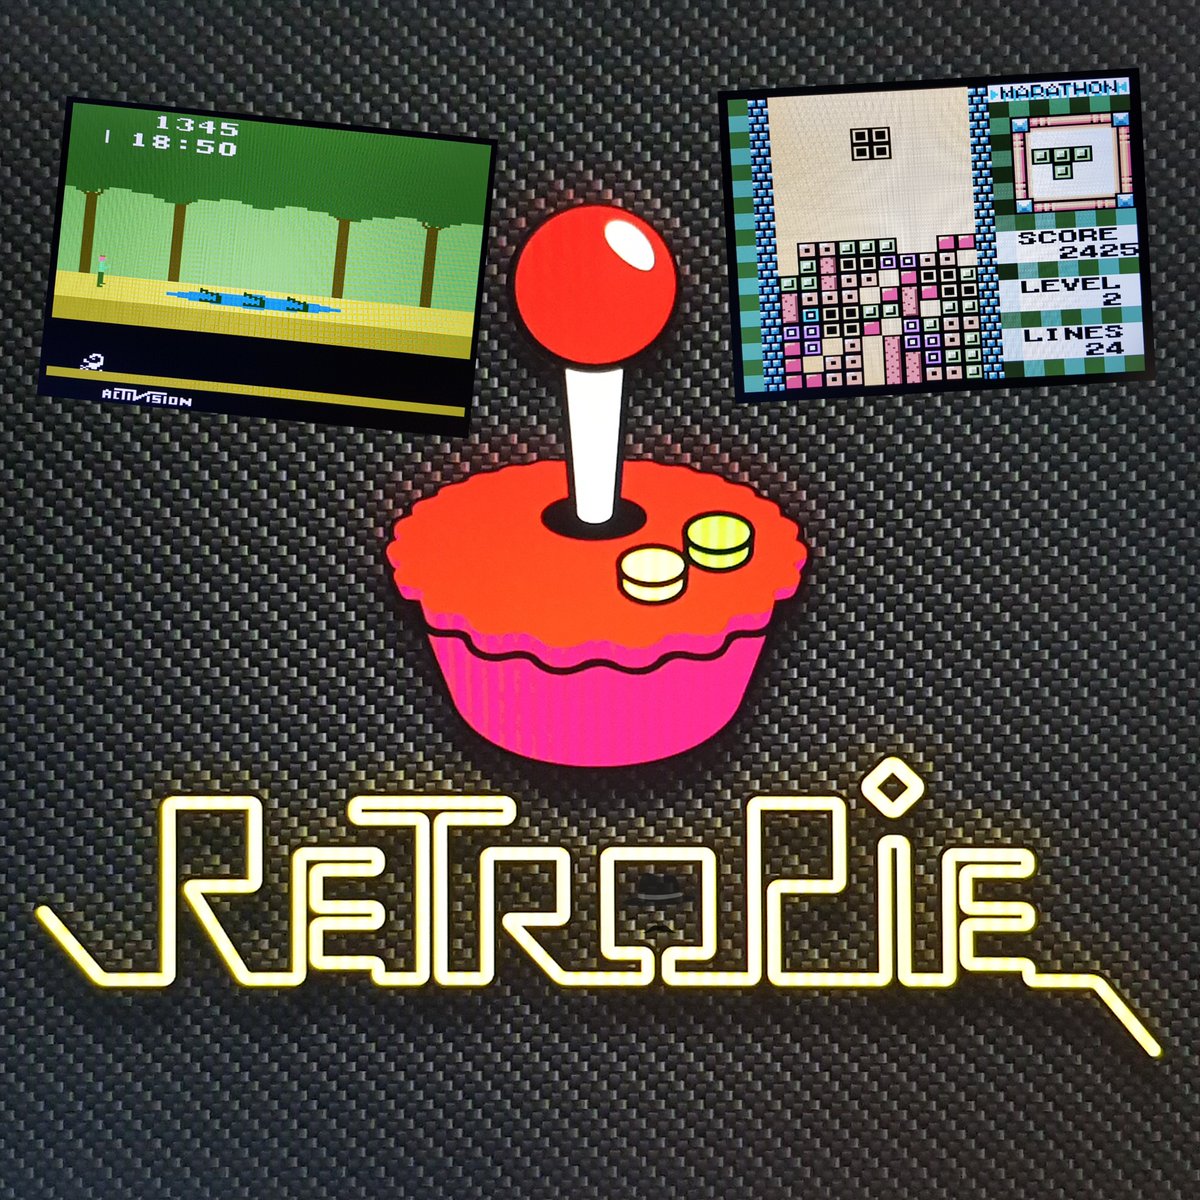 I installed #RetroPie on a #RaspberryPi 1 today! It is freakischly slow and can't run #Nintendo64, #PlayStation or even #C64 games, but I can run #Atari2600 and #GameboyColor games. #Retro #RetroComputer #RetroGaming #RetroGame #Commodore64 #Raspberry